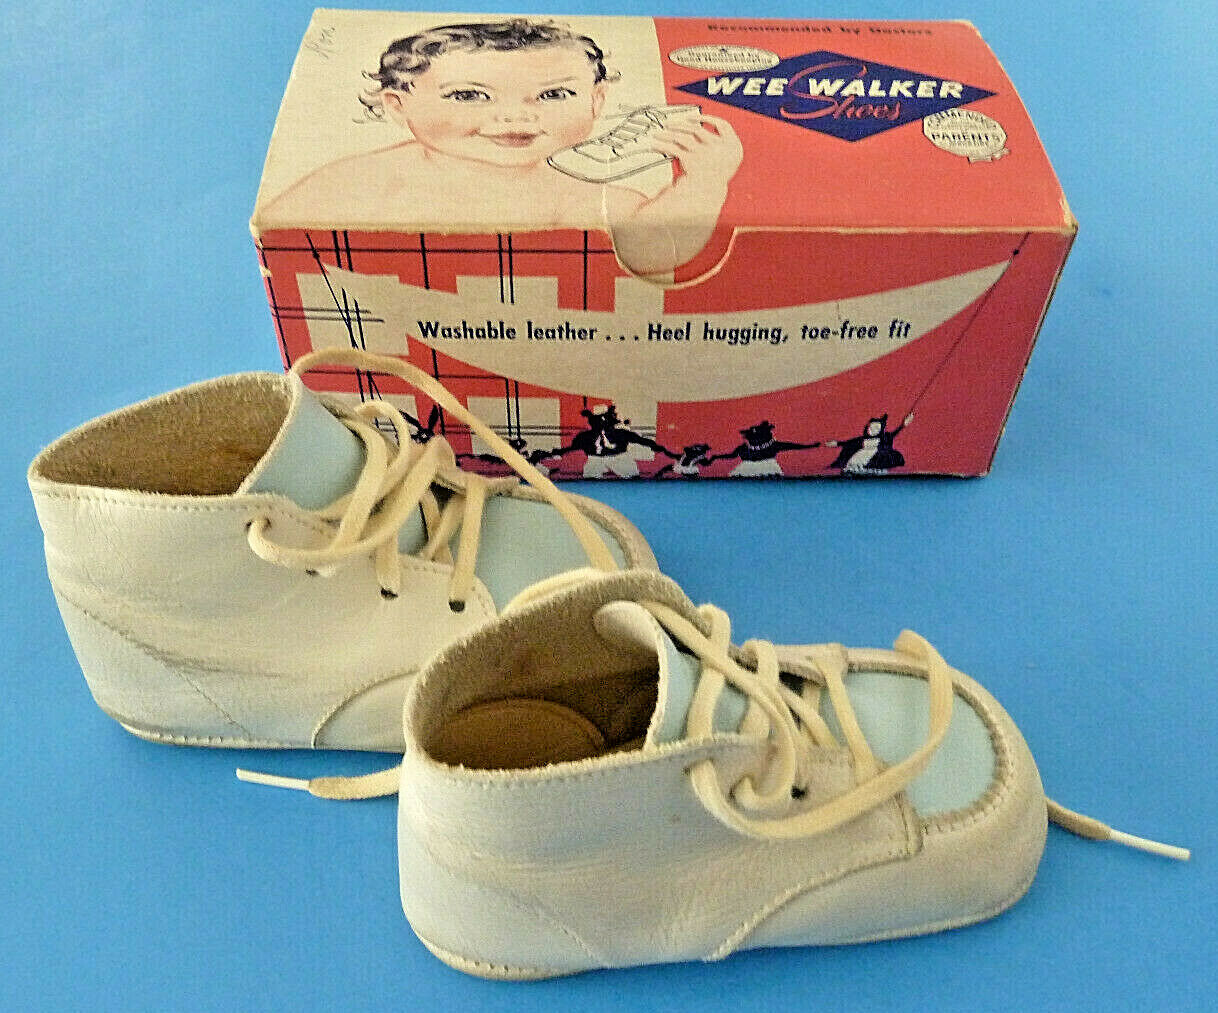 Vintage Leathe Wee Walker Baby Shoes In Box, Size 2, Rare Reorder Computer Card